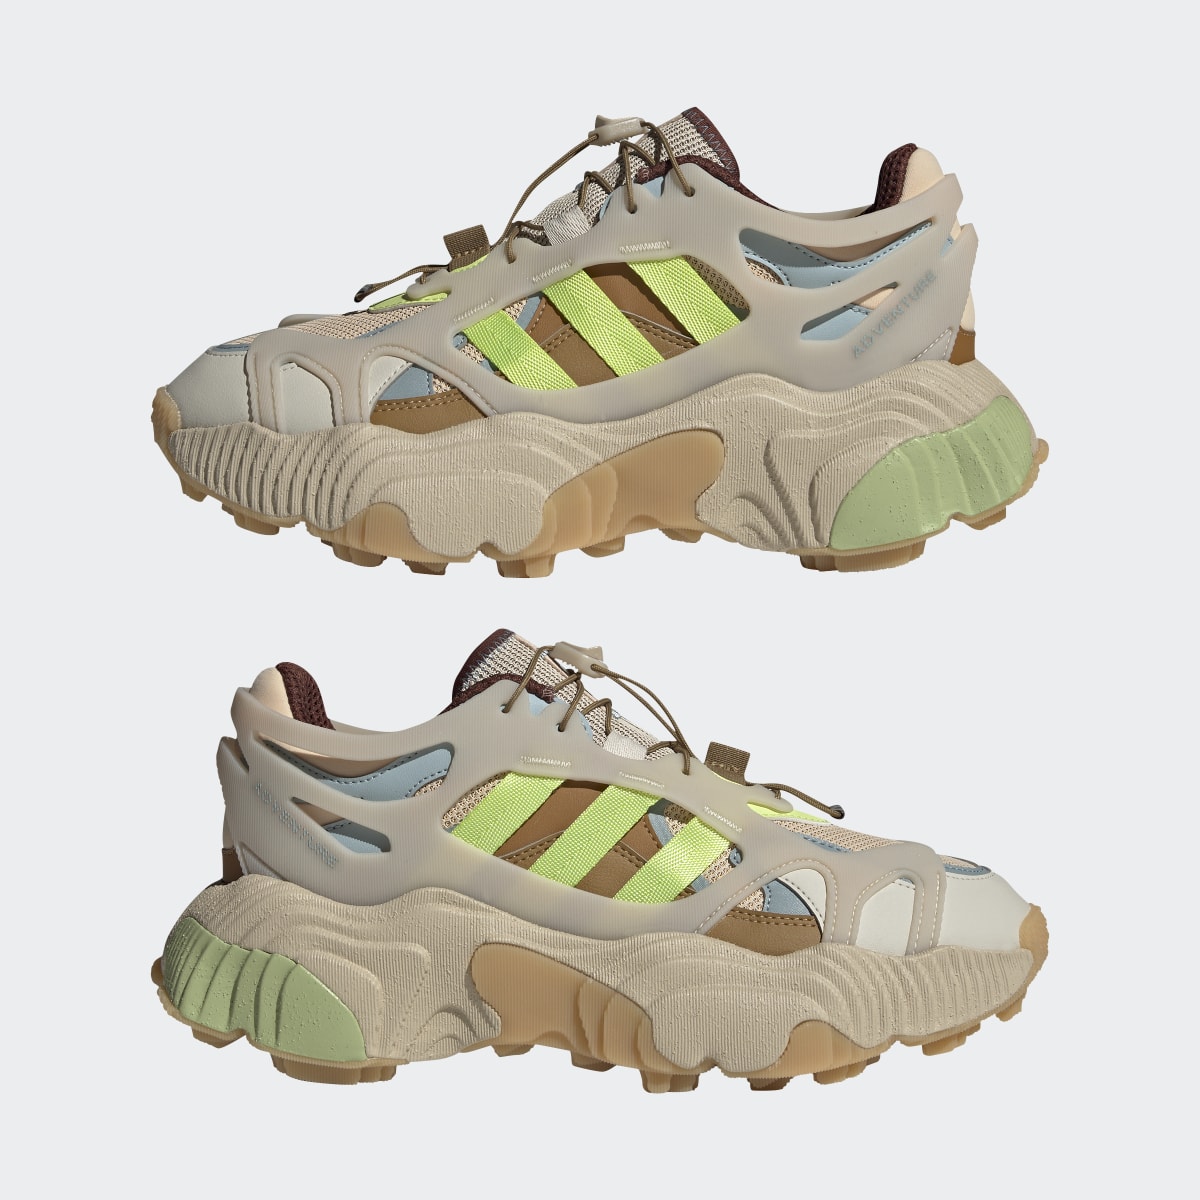 Adidas Roverend Adventure Shoes. 8